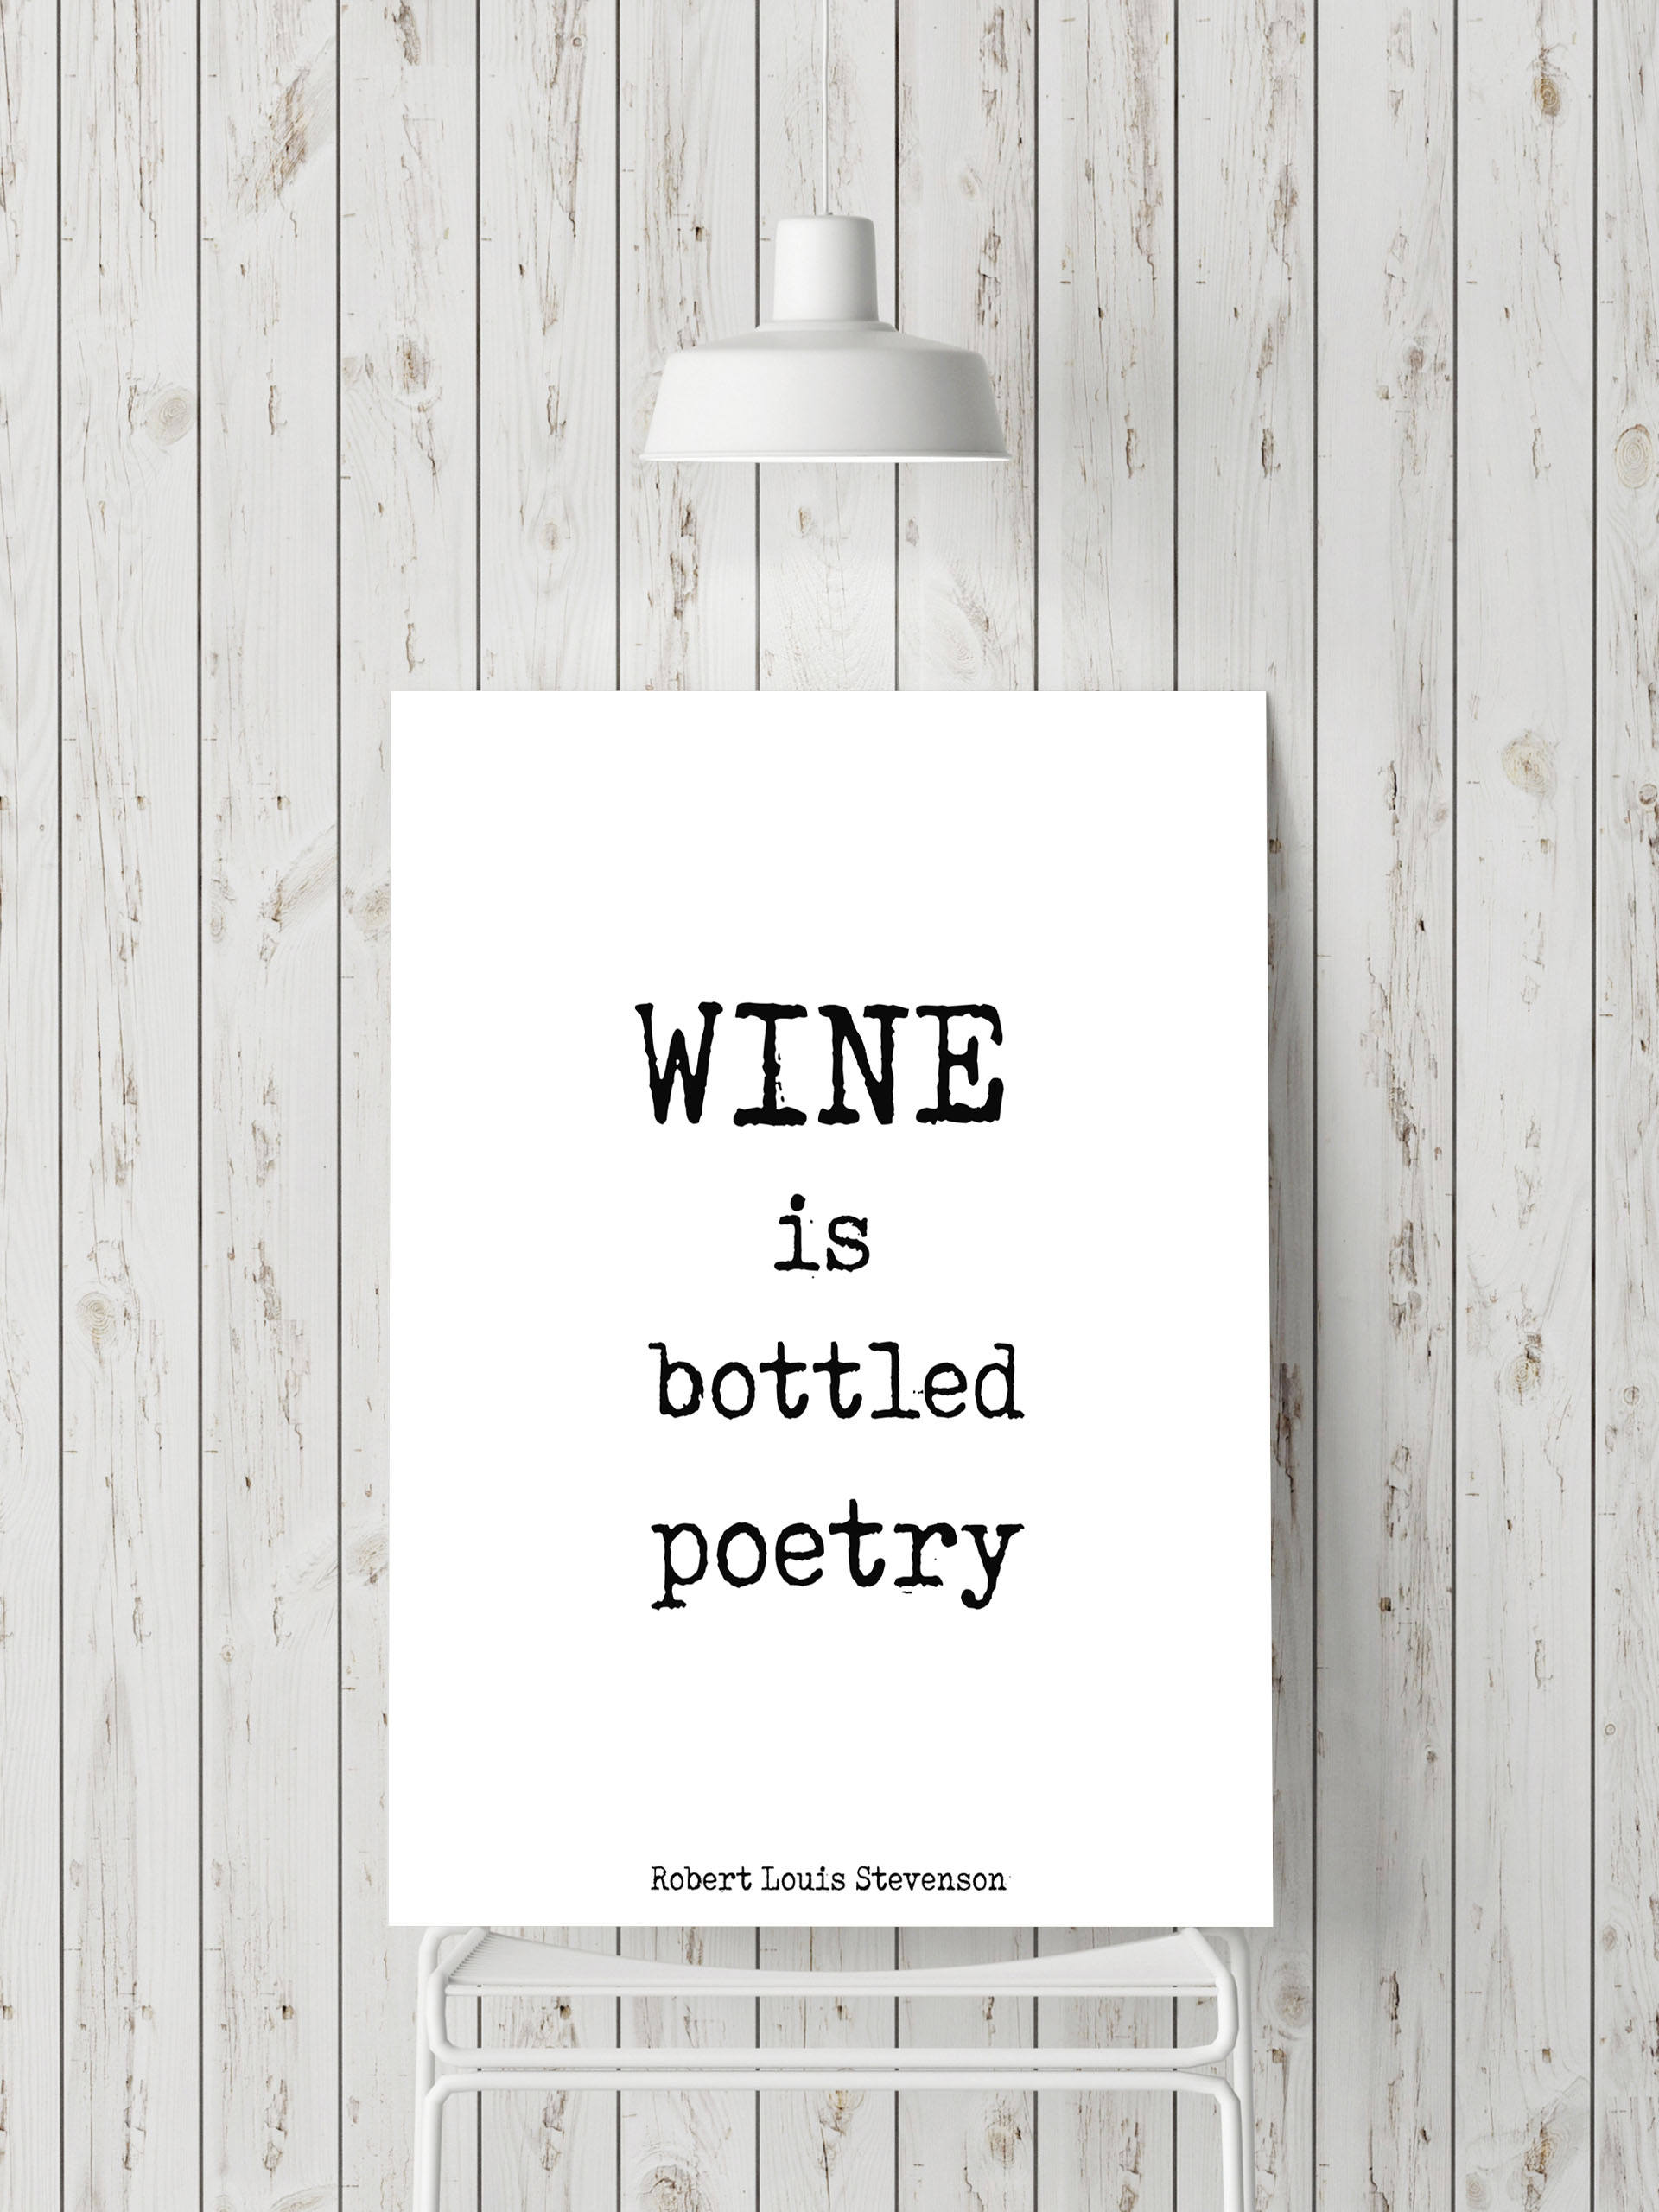 Print for Kitchen or Dining Room Wall Art - Robert Louis Stevenson Poetry Print, Wine is Bottled Poetry quote Poster Unframed